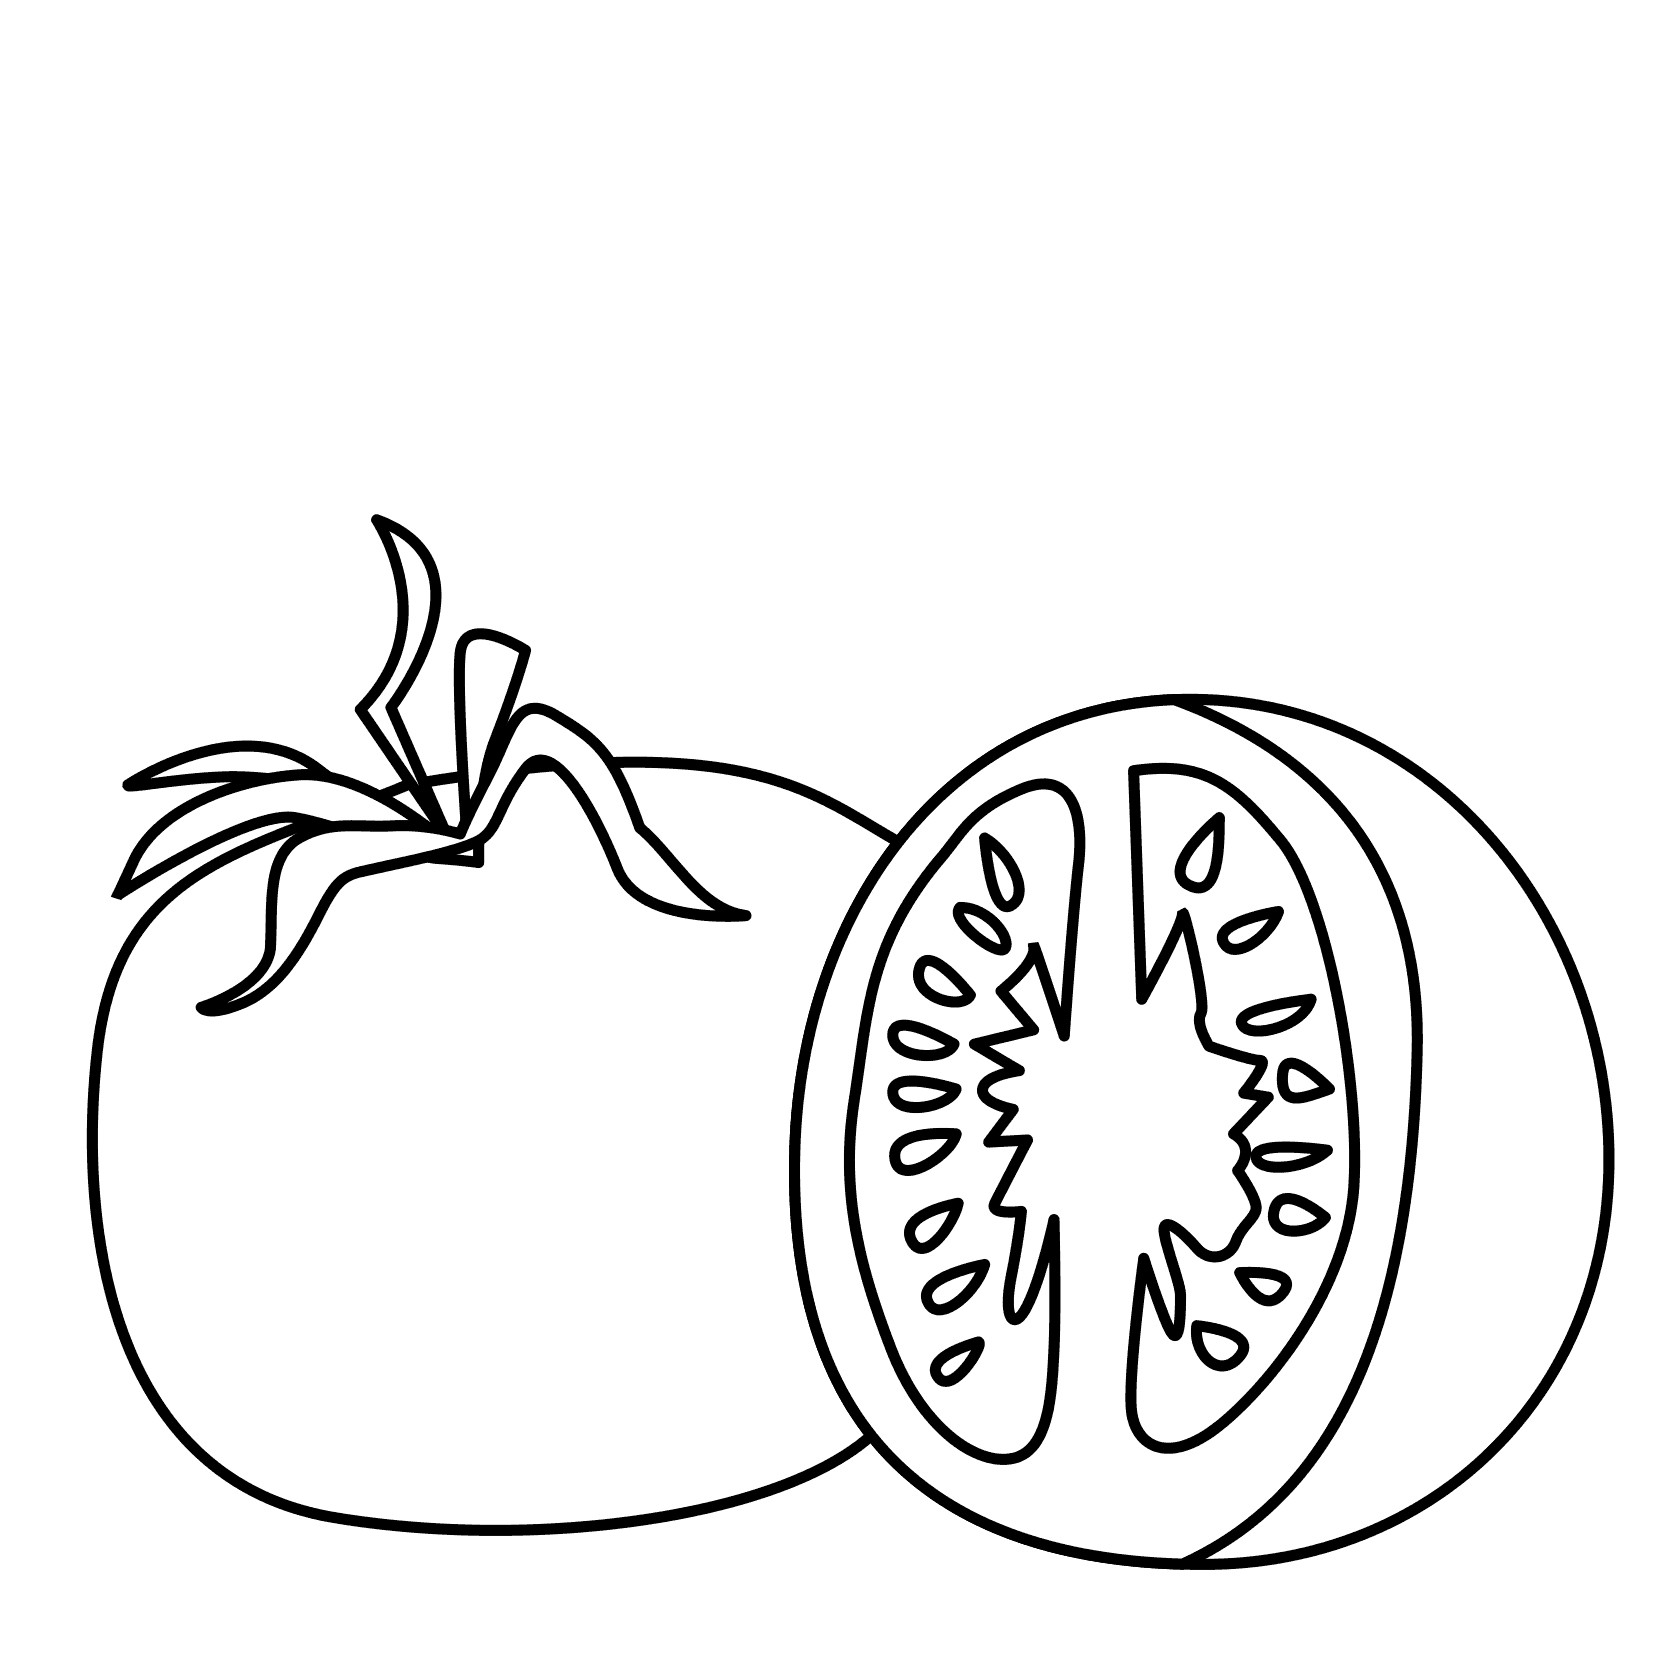 Tomatoes Coloring Pages - Coloring Home